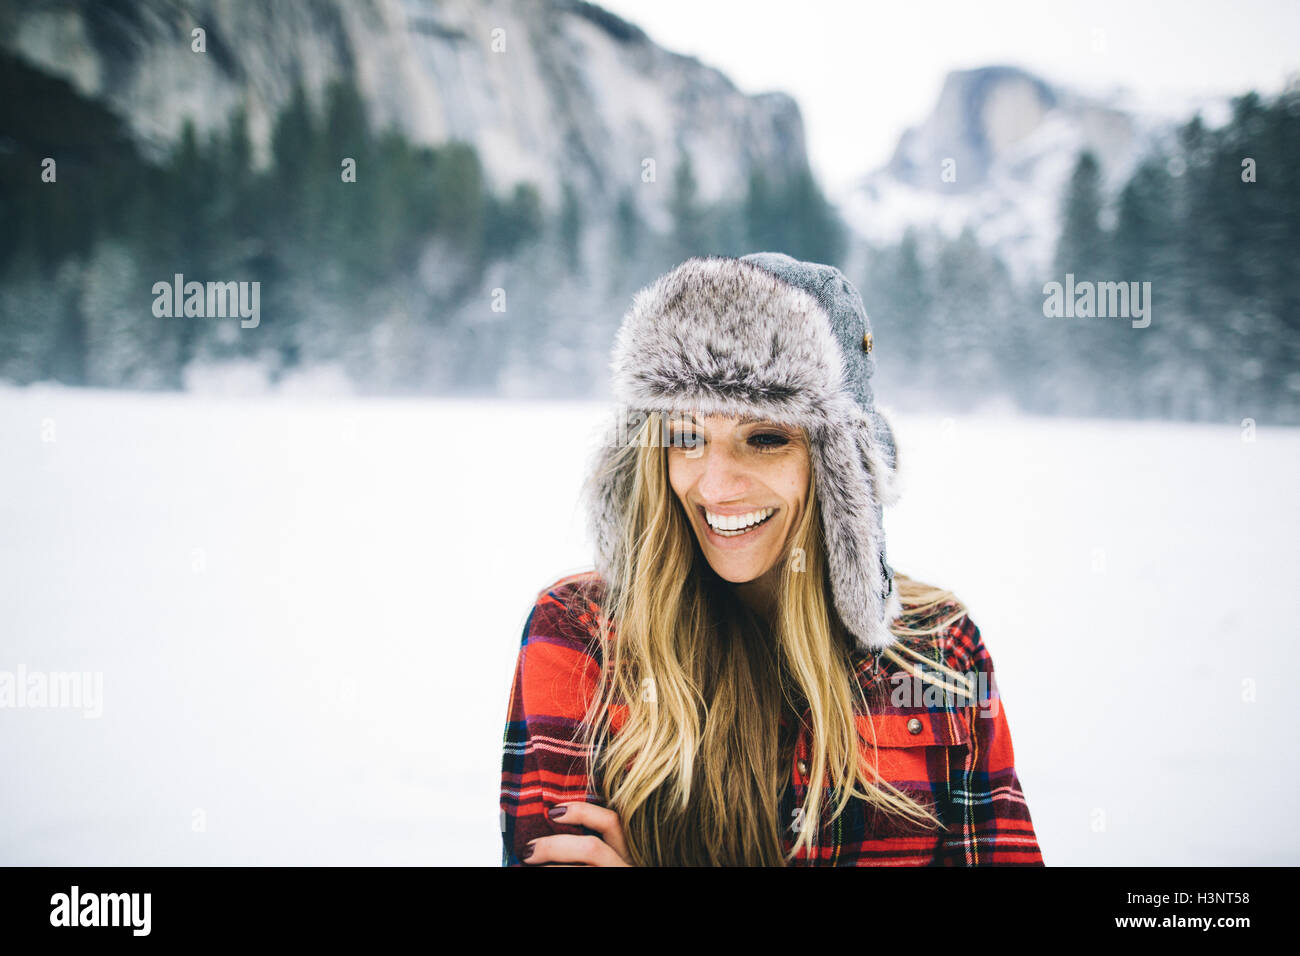 Rear view of woman wearing ushanka hat on snow-covered landscape Stock Photo